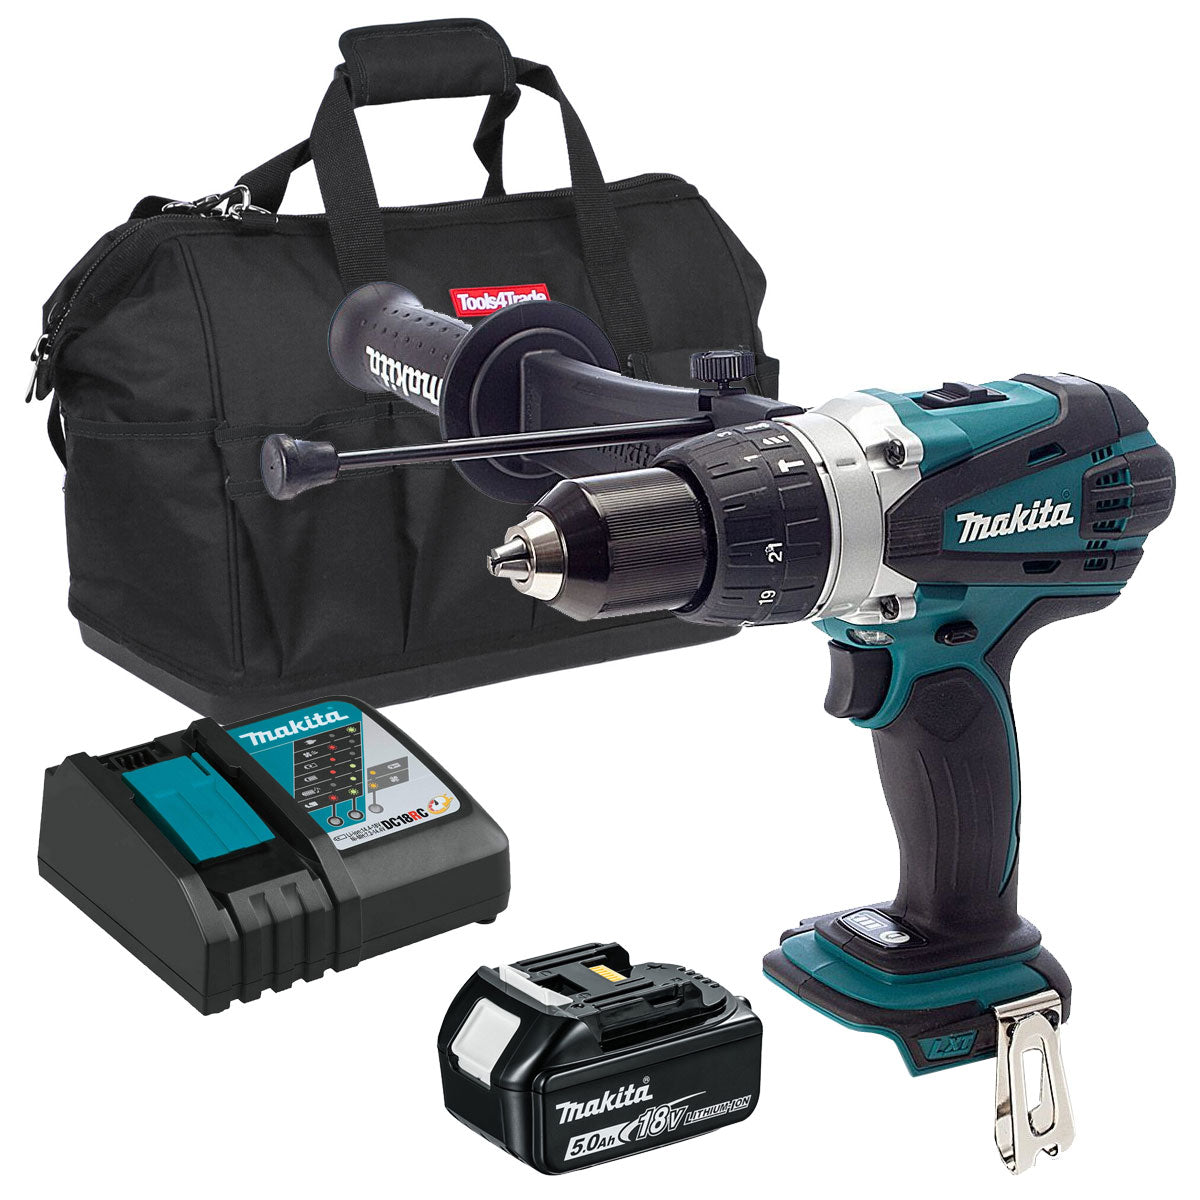 Makita DHP458Z 18V Combi Drill with 1 x 5.0Ah Battery Charger & Tool Bag